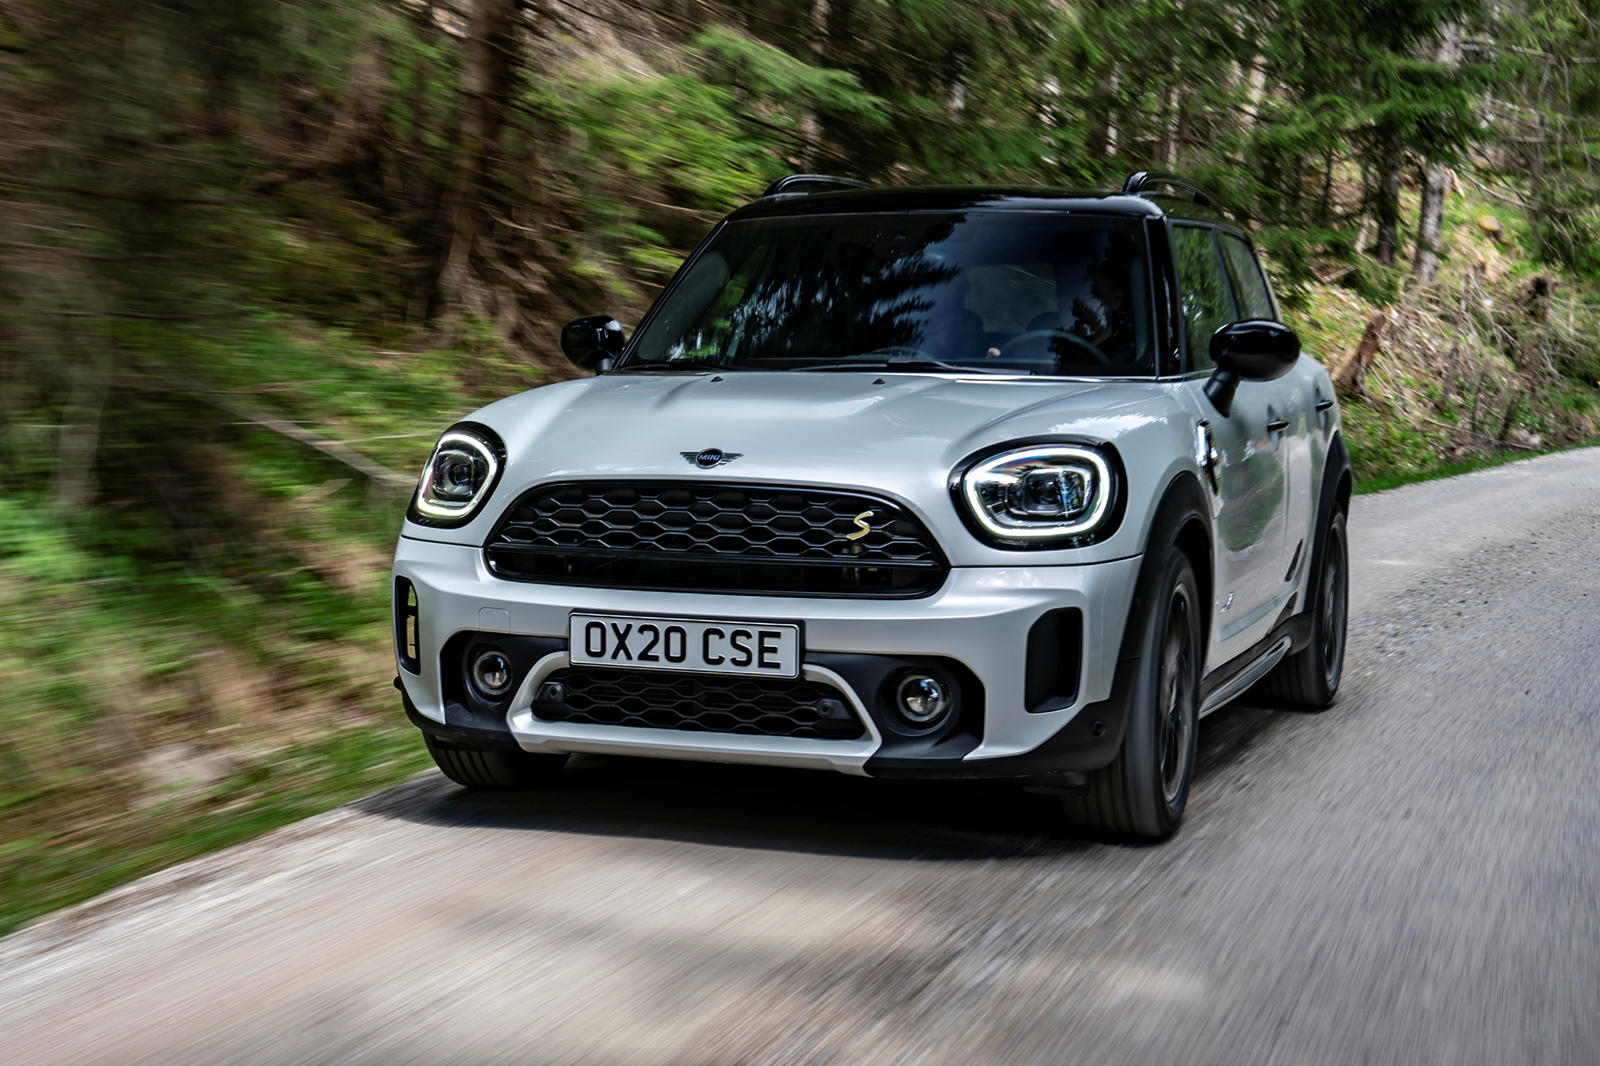 2021 Mini Cooper Countryman Plug-in Hybrid Front View Driving